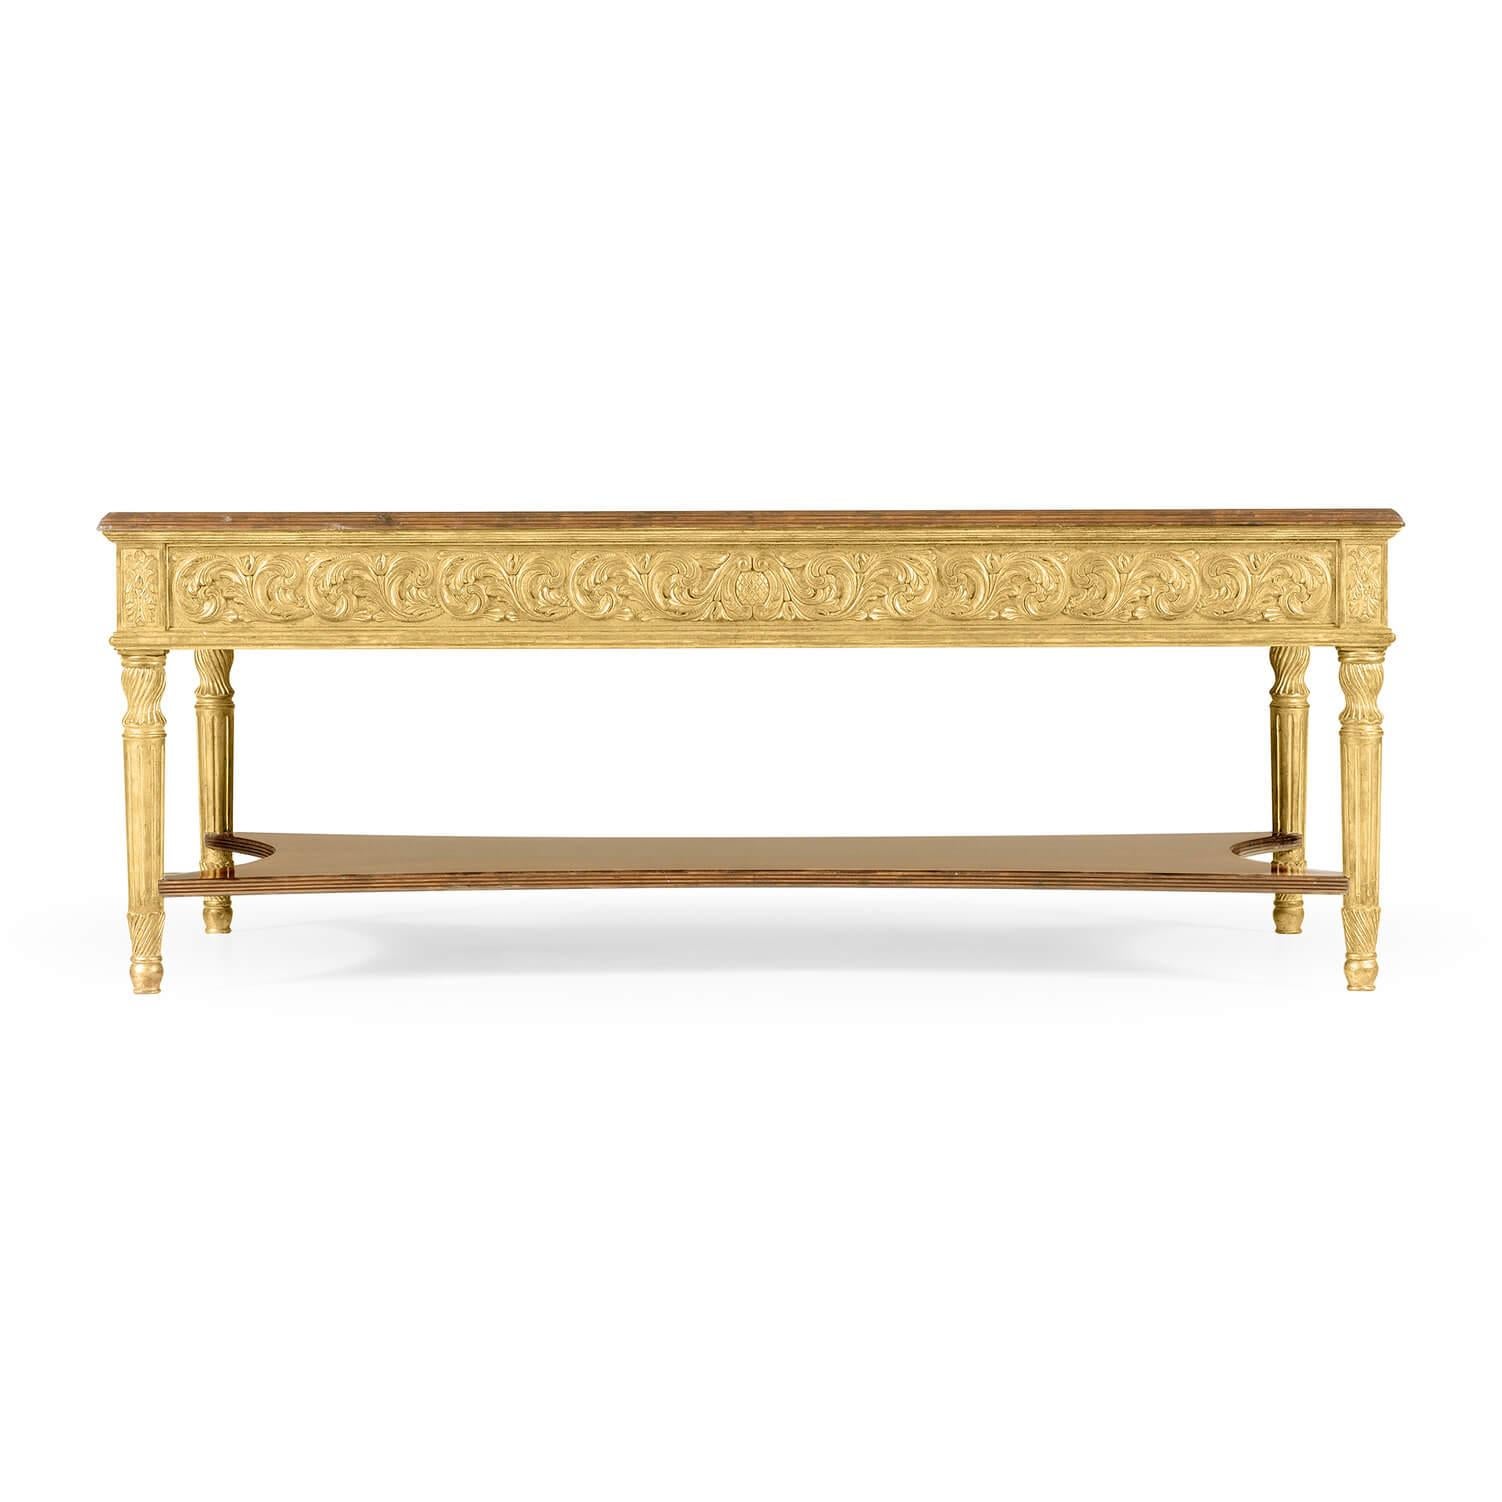 A fine George III style rectangular coffee table, the satinwood top with fine running marquetry inlay set above a gilded frieze of floral motifs, further veneering to the under-tier and fluted gilt legs.

Dimensions: 54